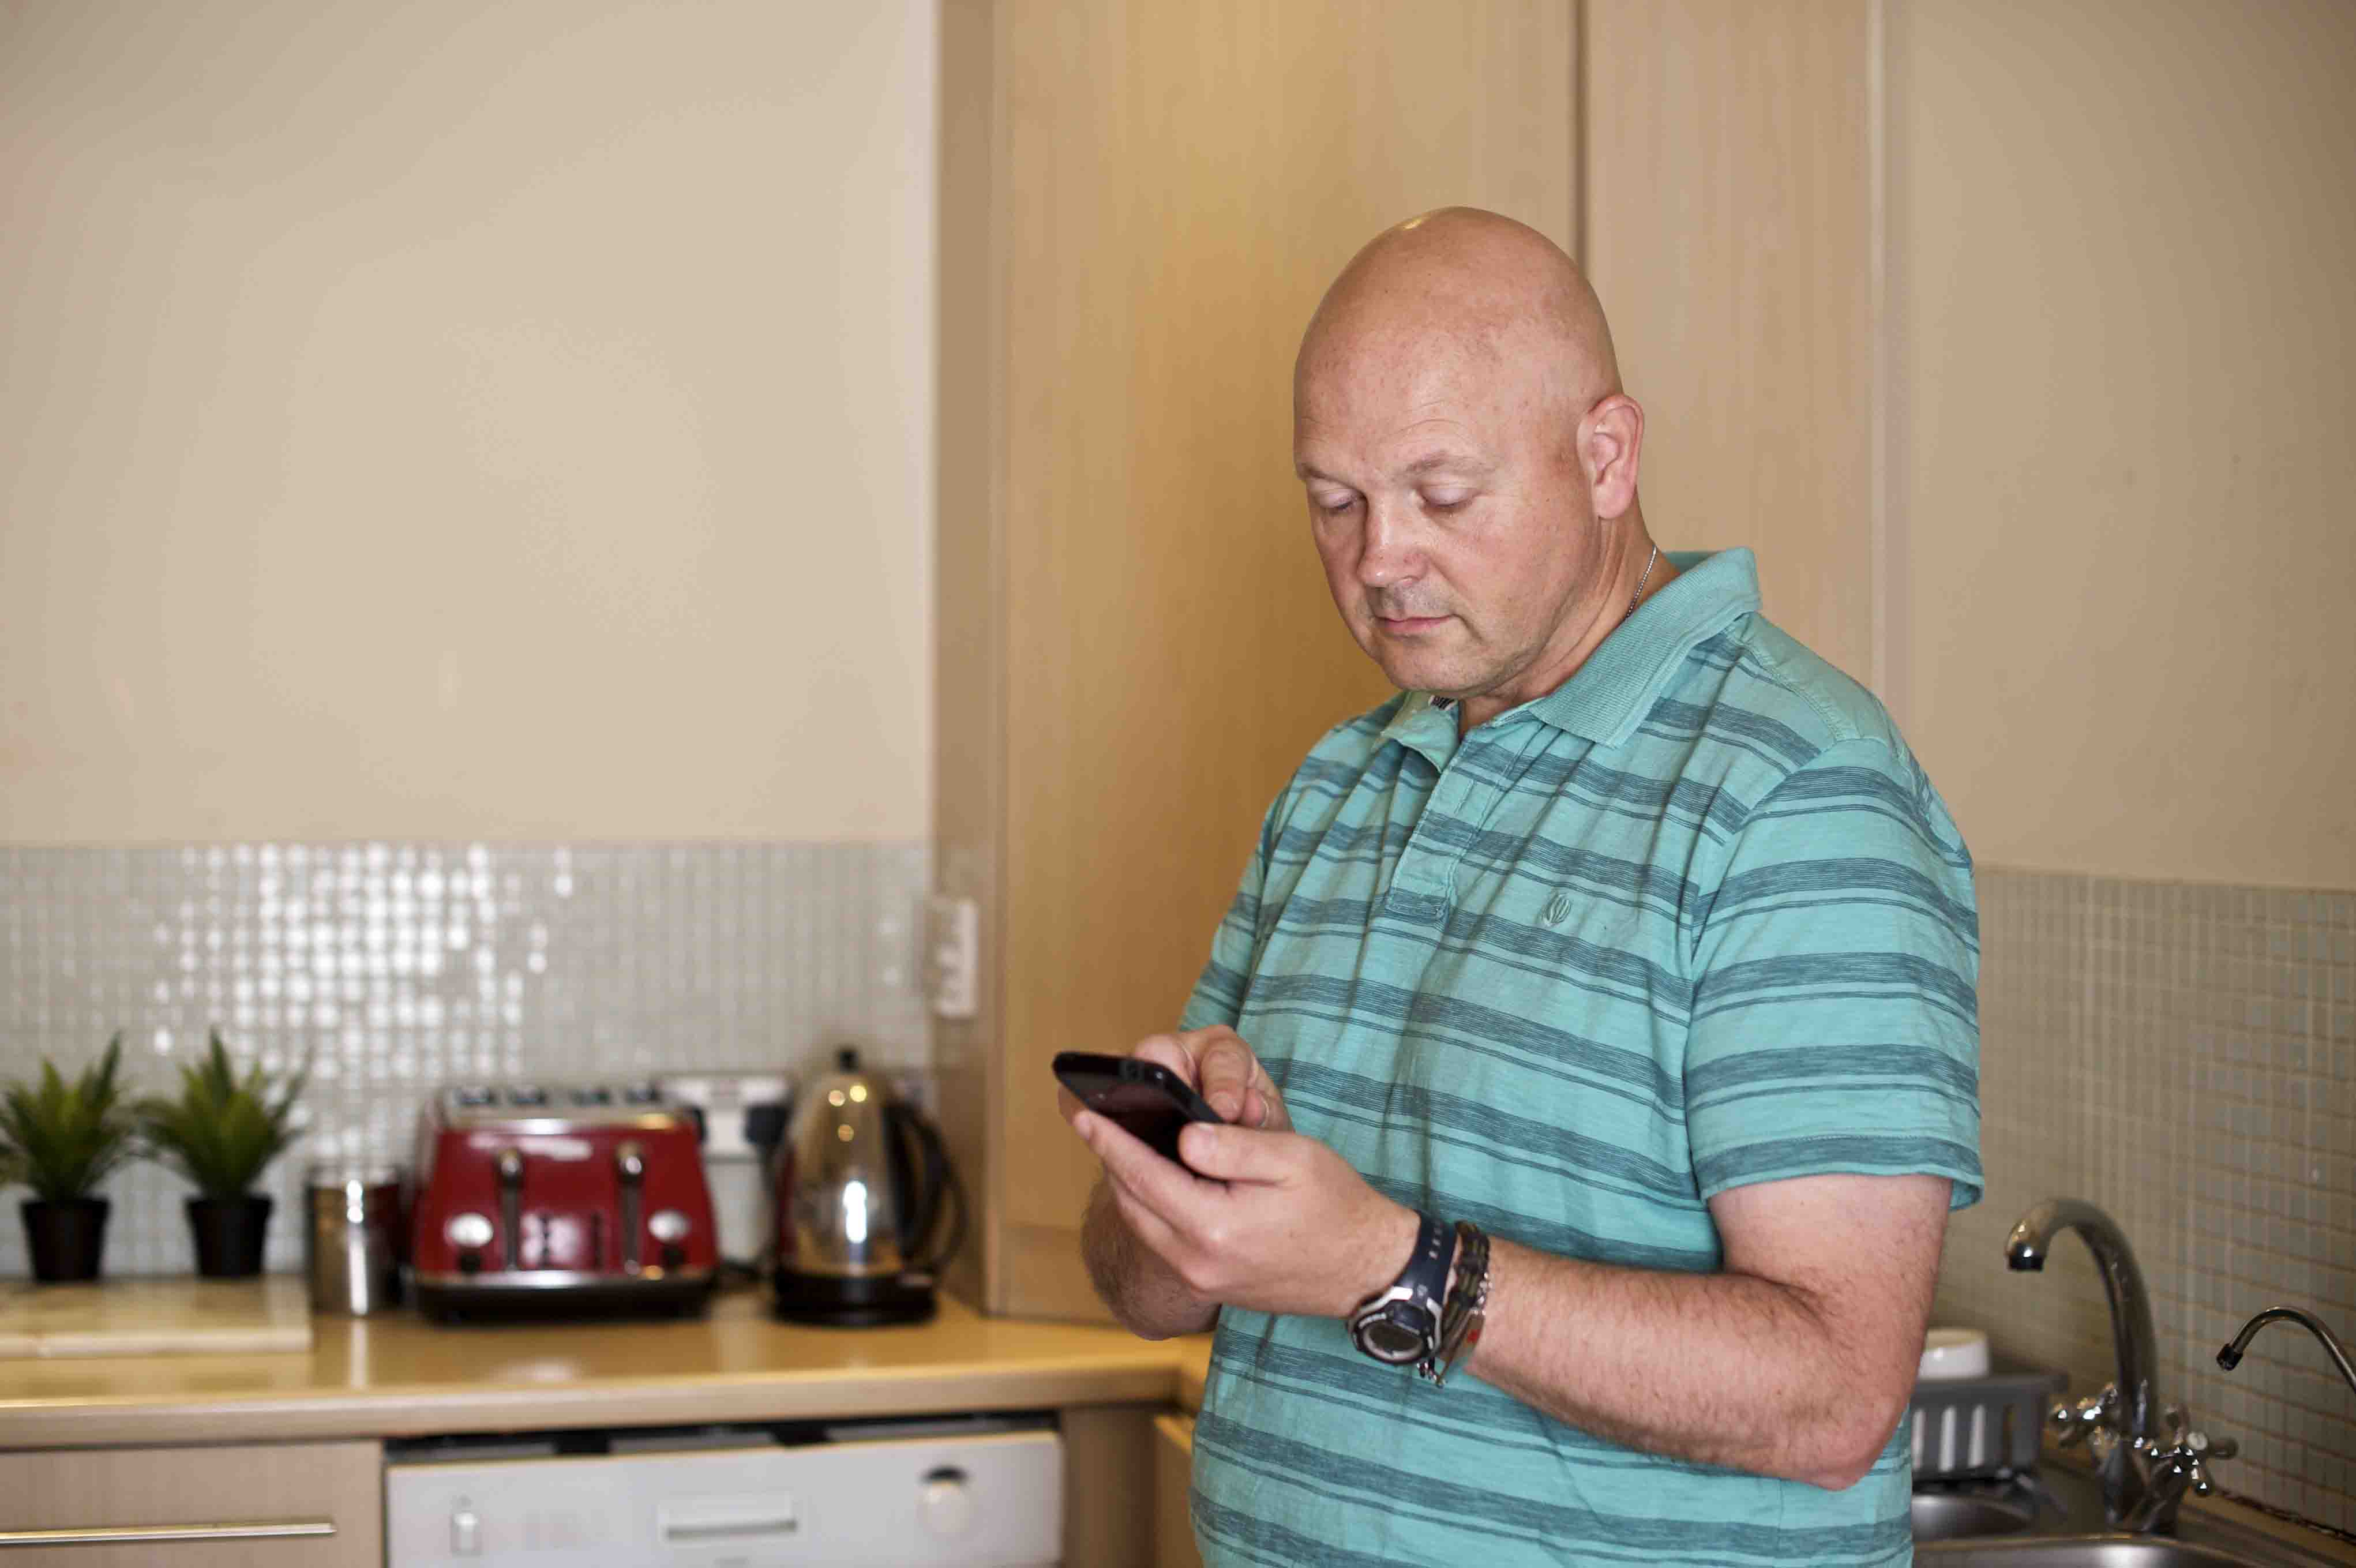 man on his mobile phone in the kitchen